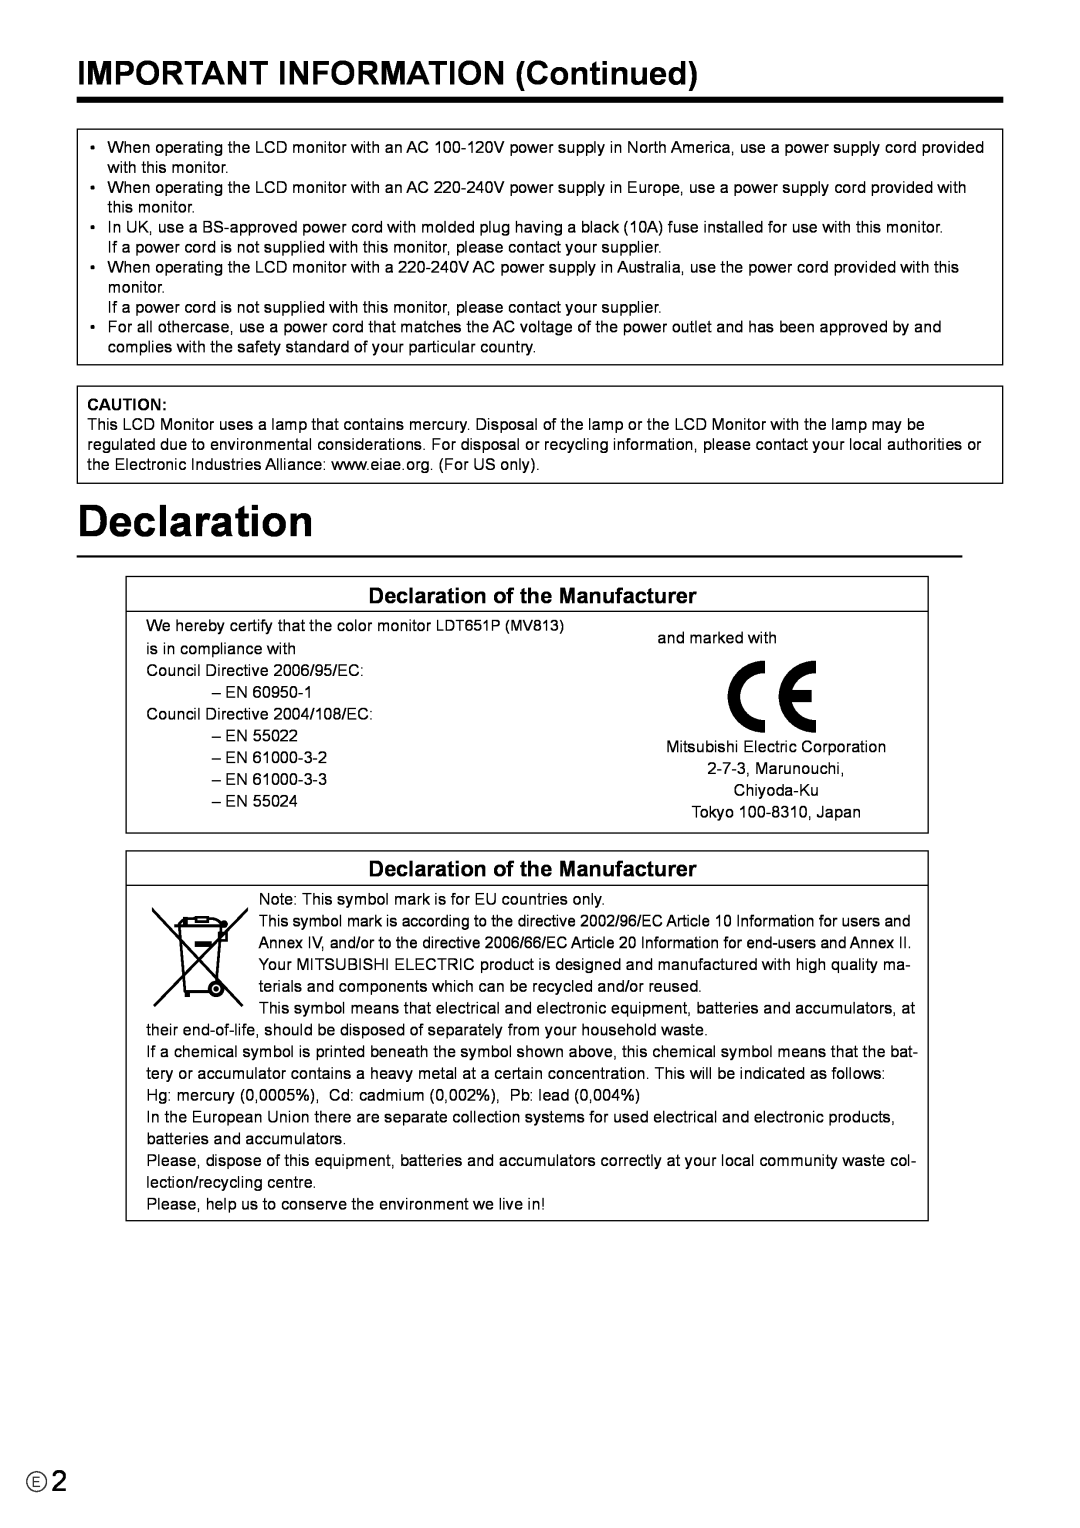 Mitsubishi Electronics LDT651P operation manual IMPORTANT INFORMATION Continued, Declaration of the Manufacturer 